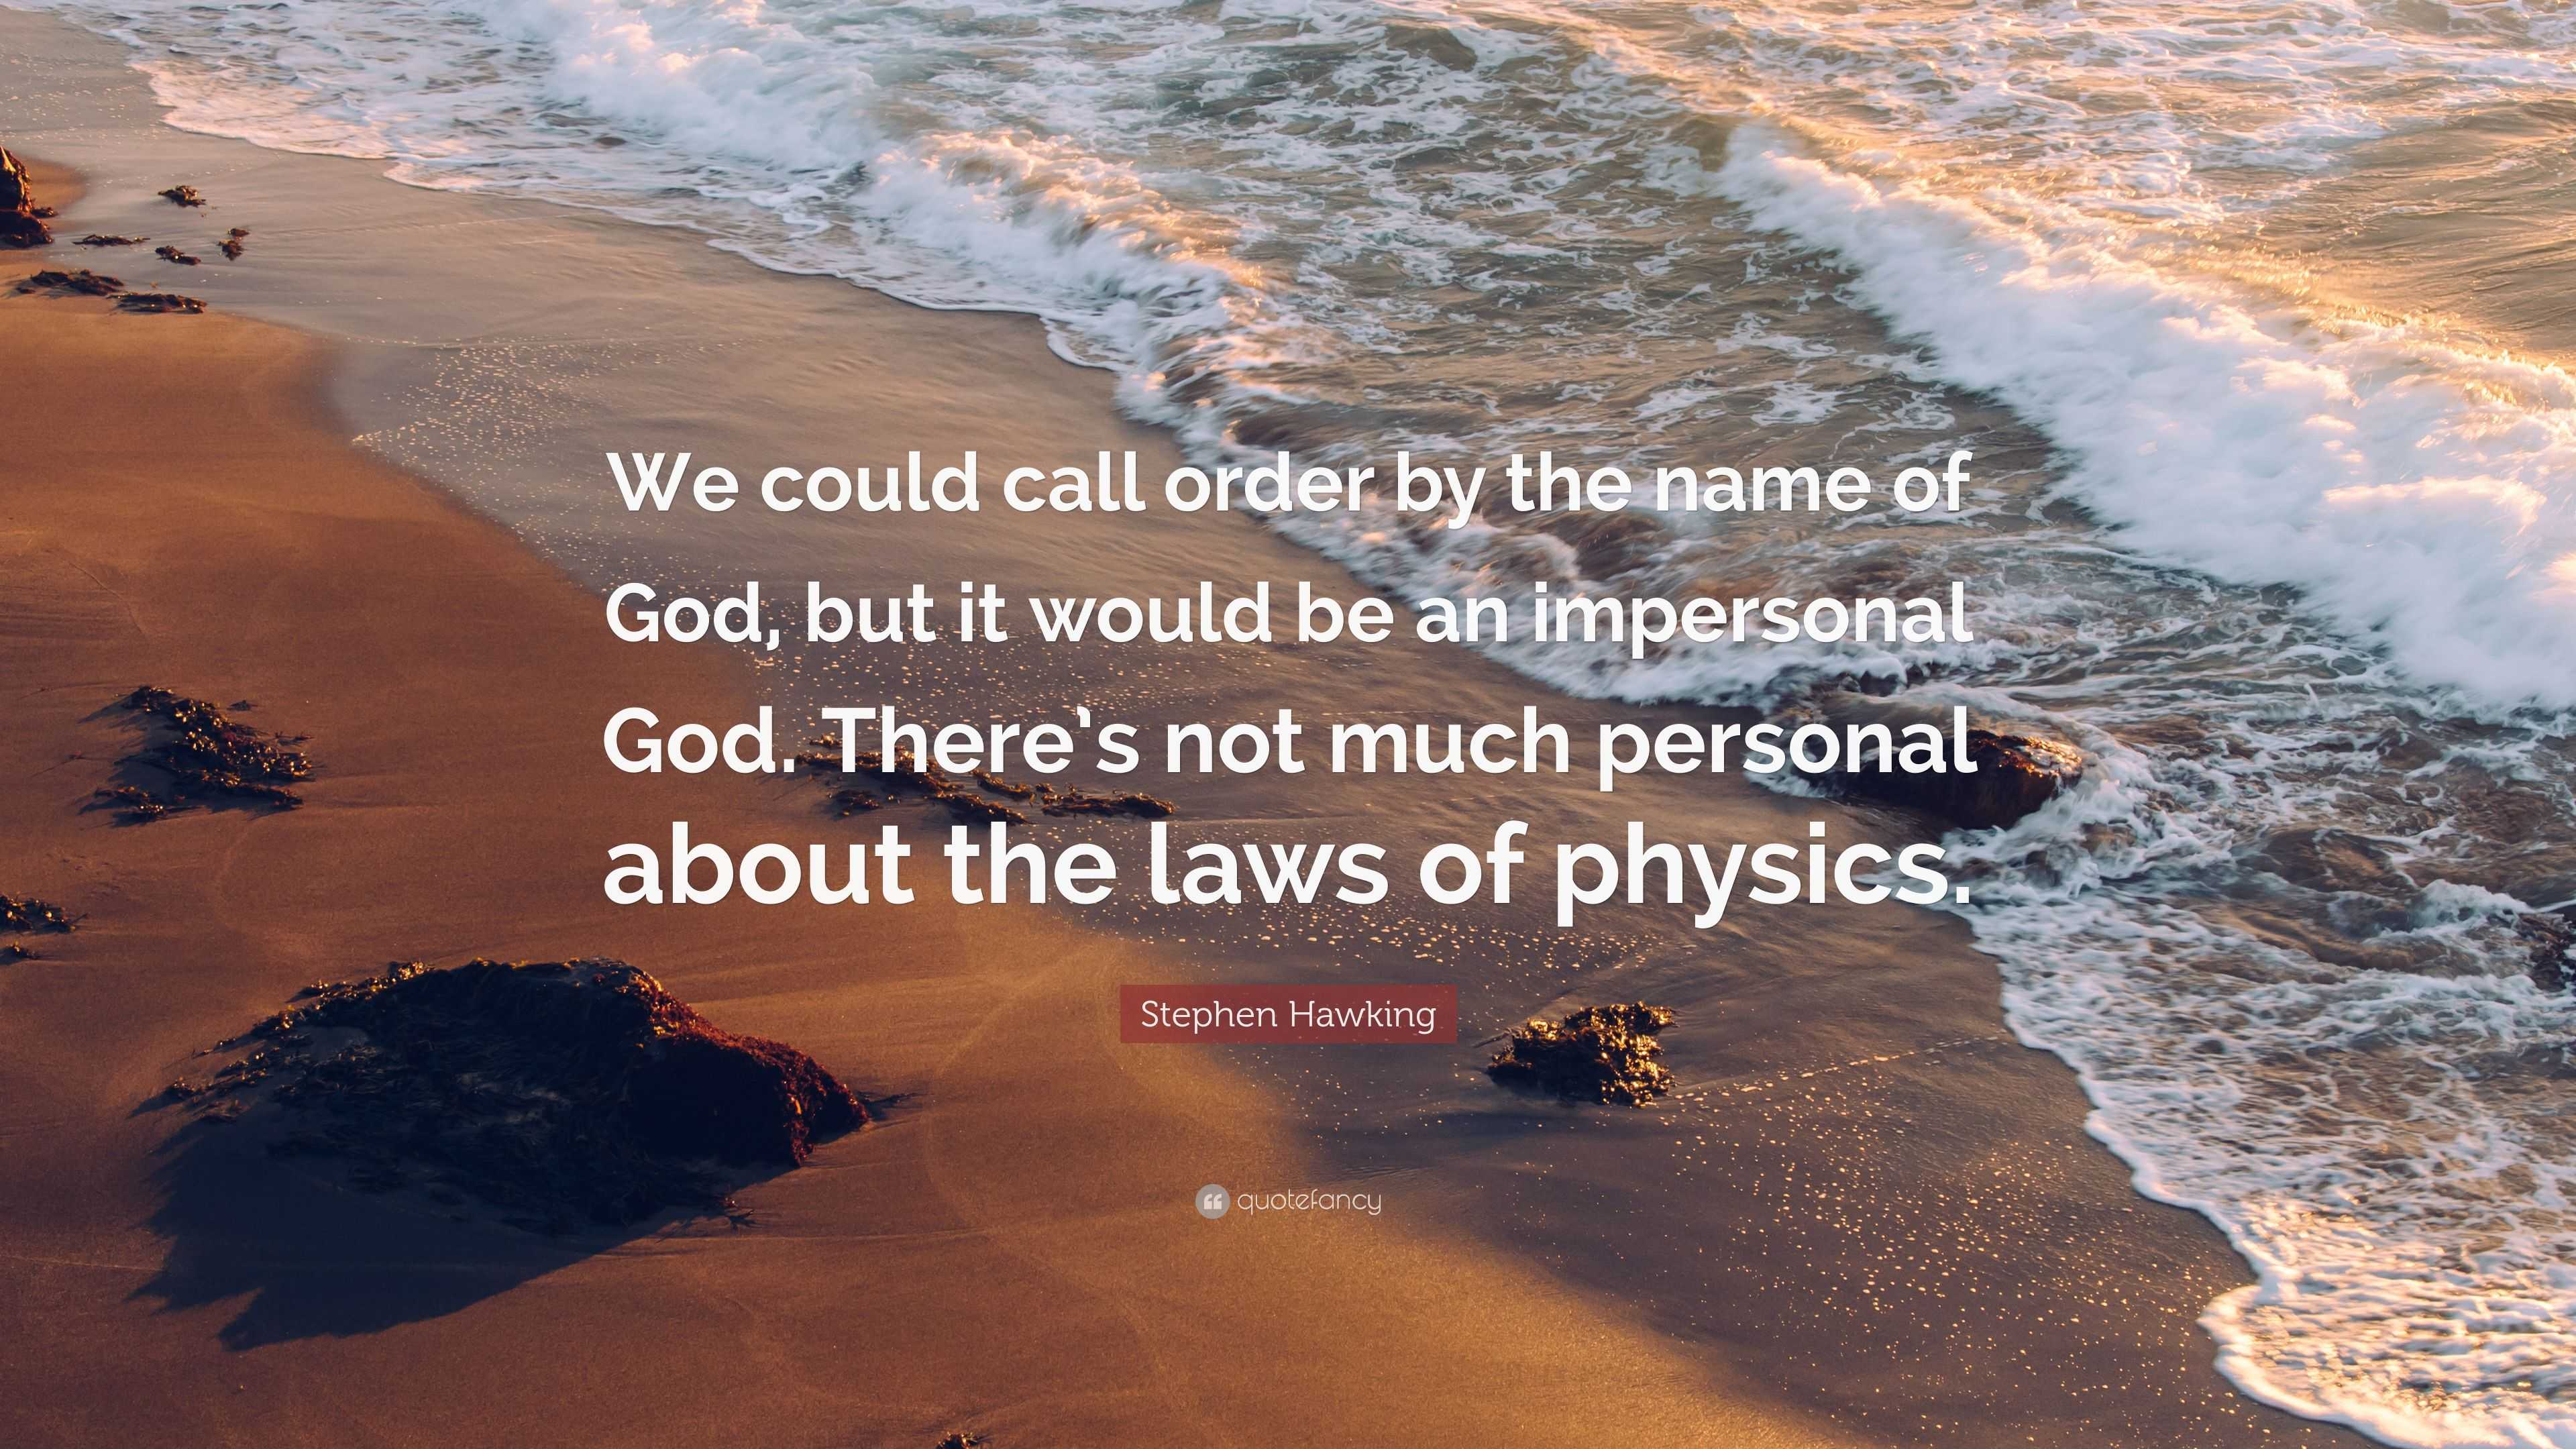 Stephen Hawking Quote: “We could call order by the name of God, but it